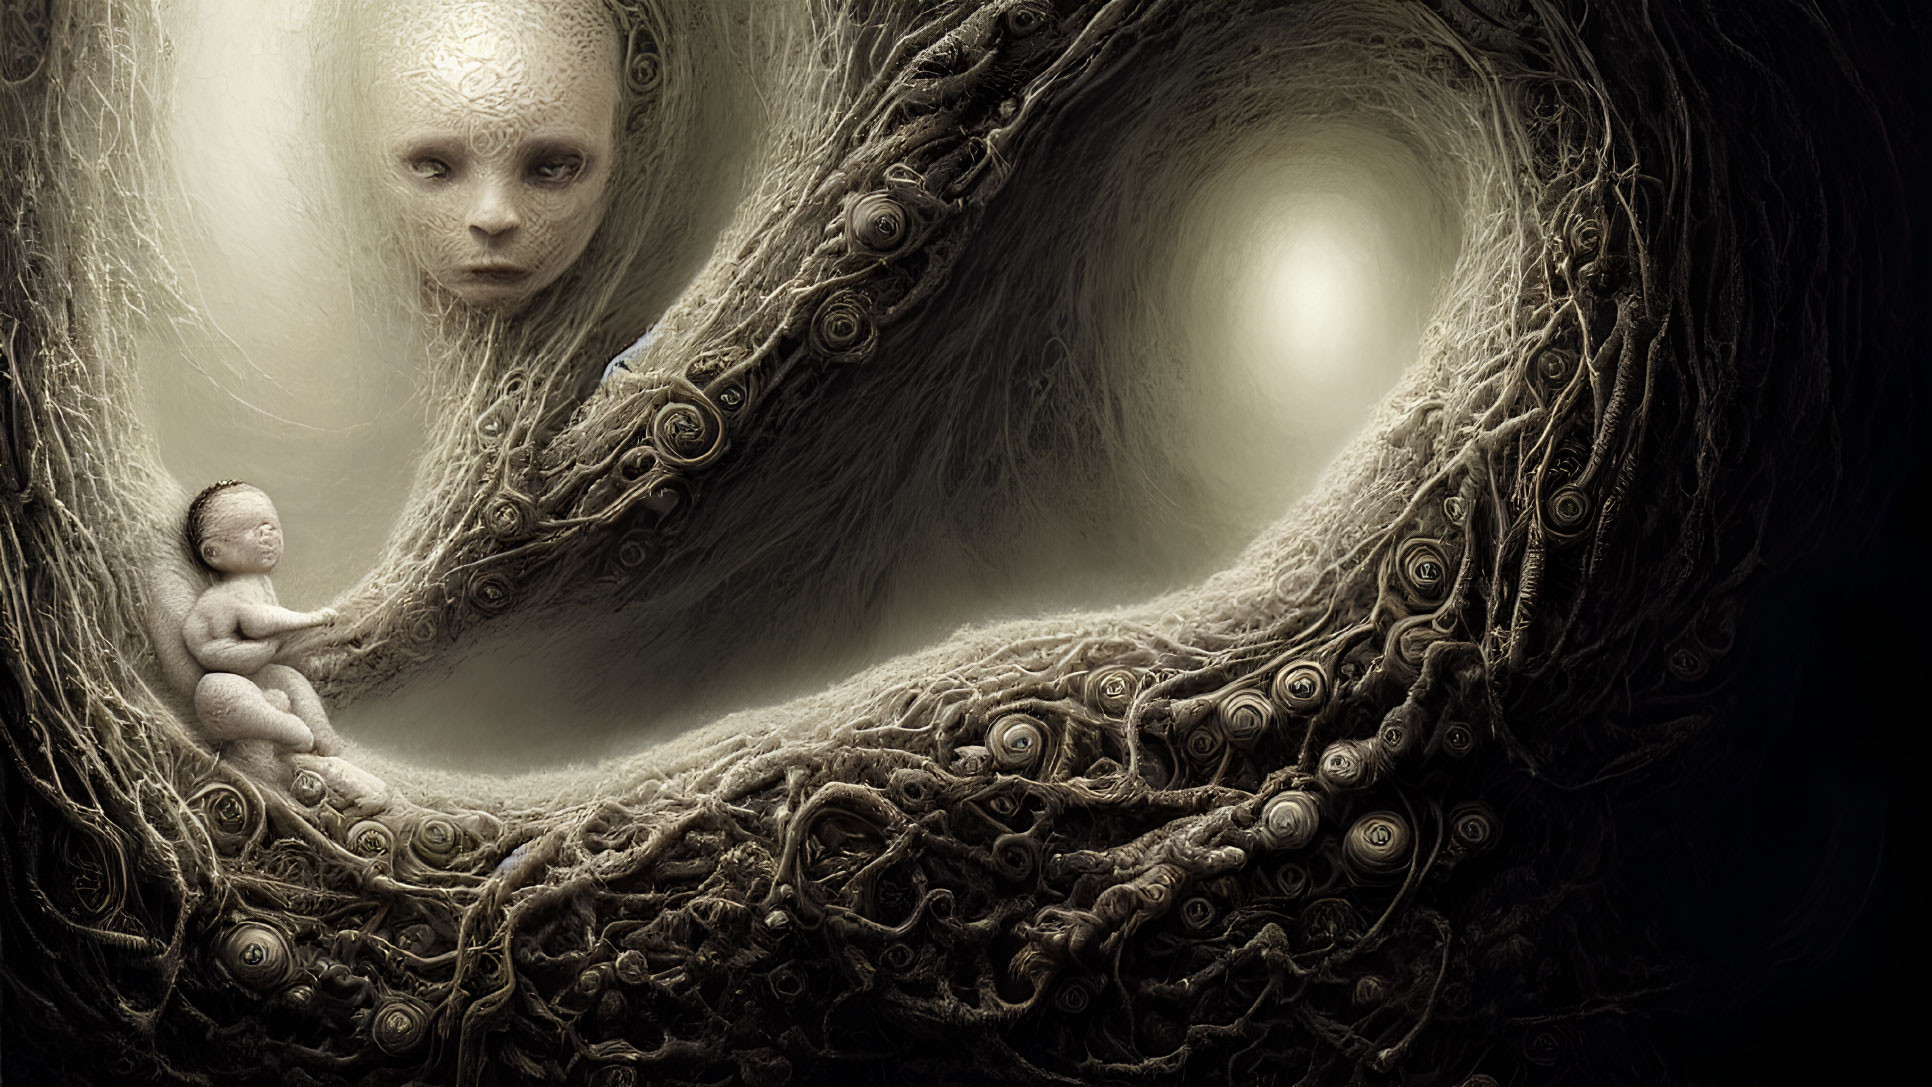 Surreal artwork of large face with eyes and tendrils cradling small figure